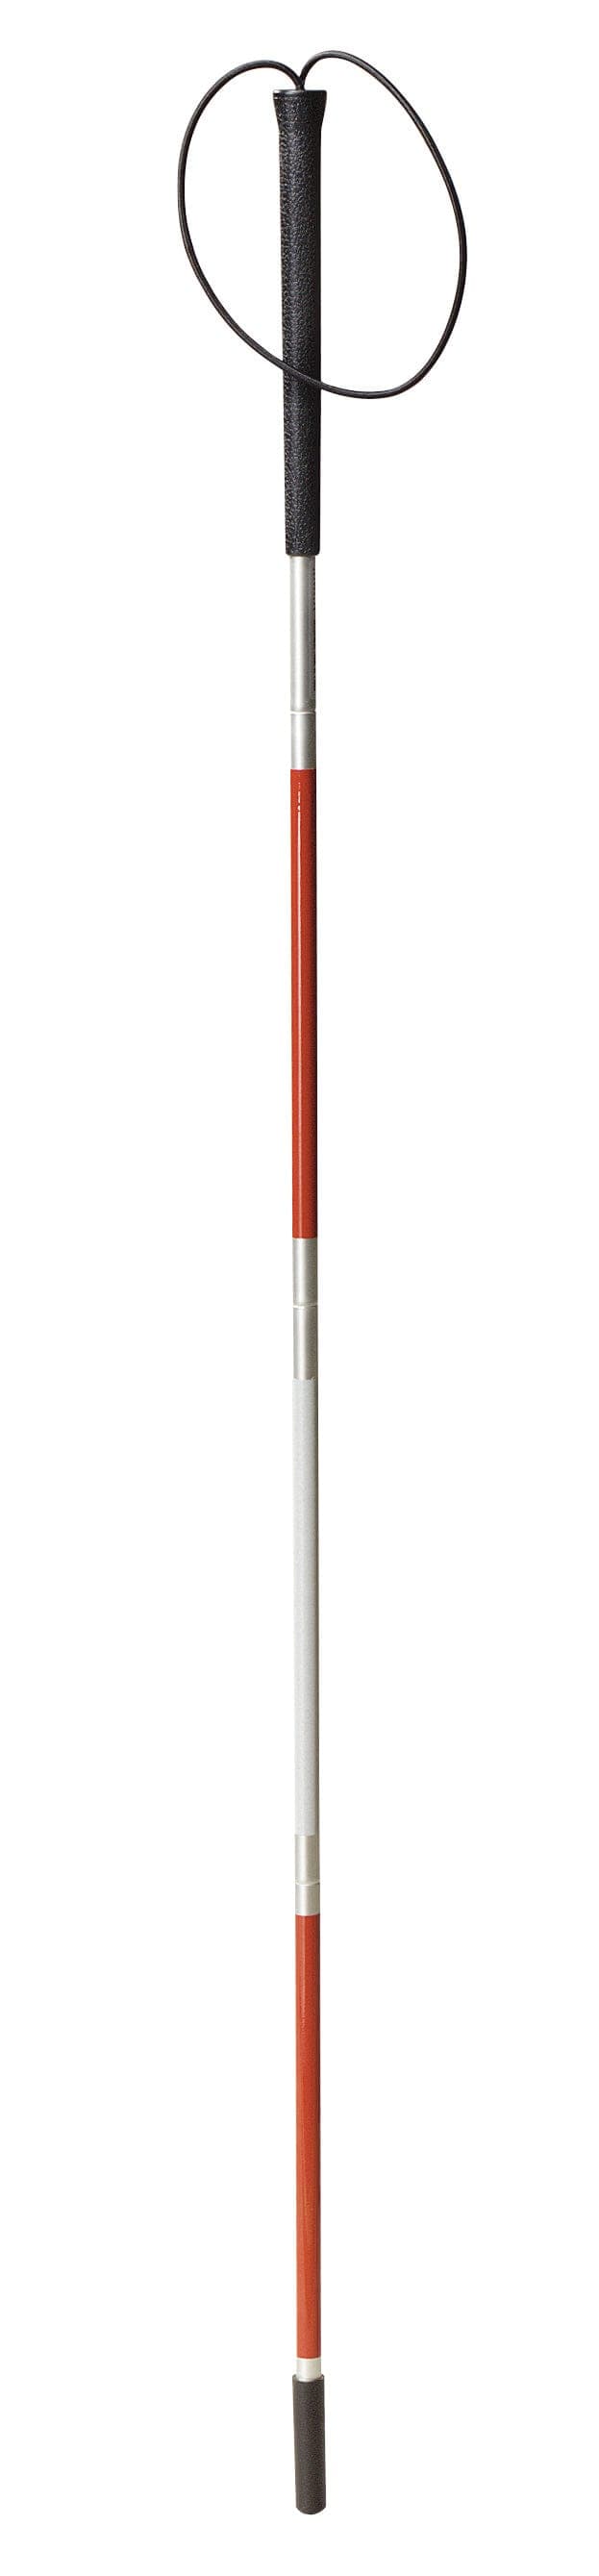 Drive Medical Canes Drive Medical Folding Blind Cane with Wrist Strap